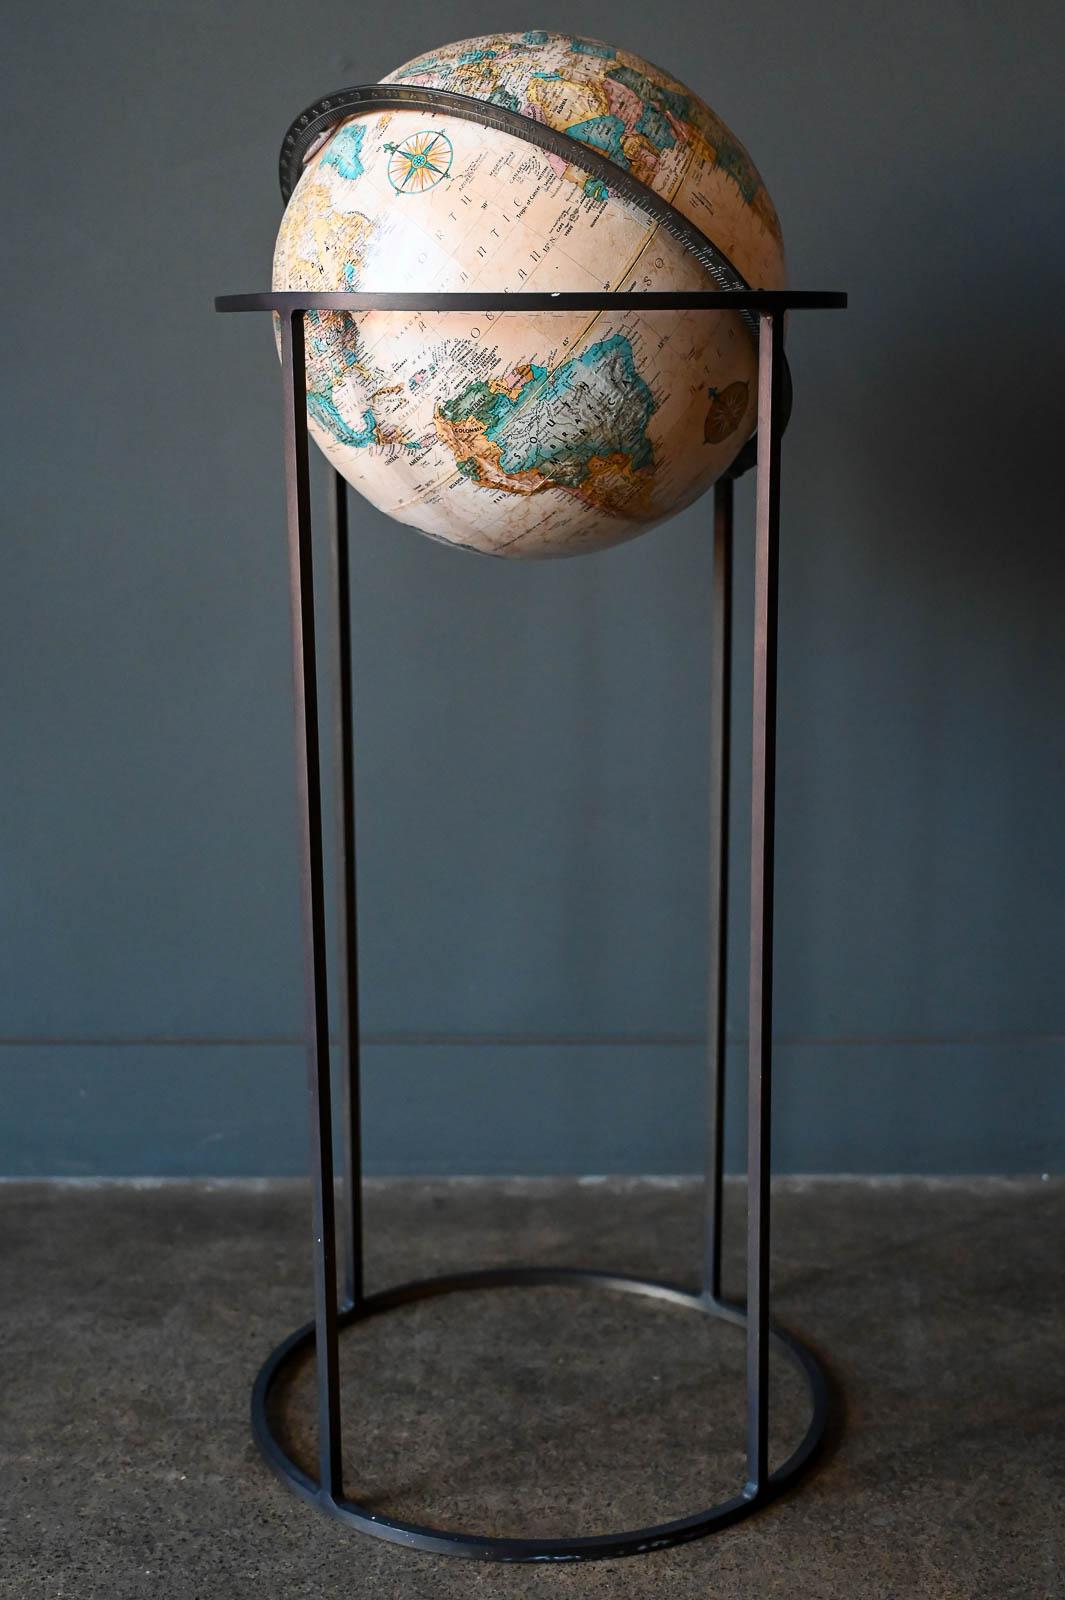 Vintage Replogle articulating globe on brass stand, ca. 1970. Globe dates to the late 60's, early 70's based on geographic name changes, etc. Beautiful condition with brass stand and wonderful patina. The globe articulates and moves freely with